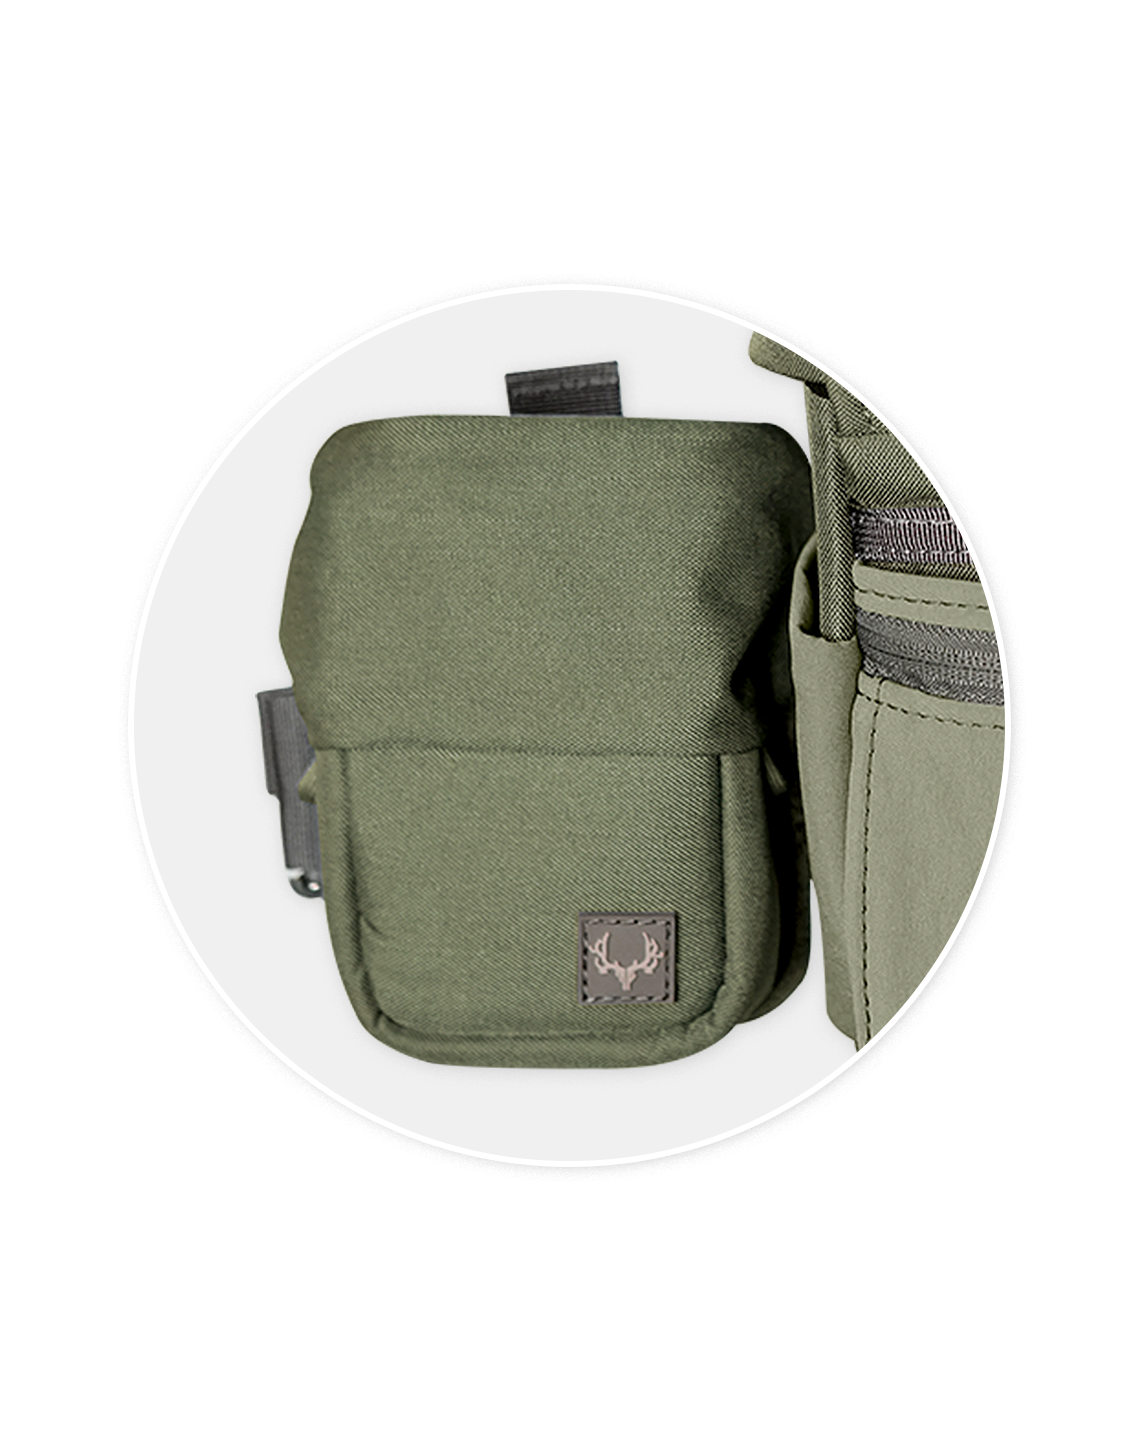 Ranger green rangefinder pouch by Muley Freak for the field.